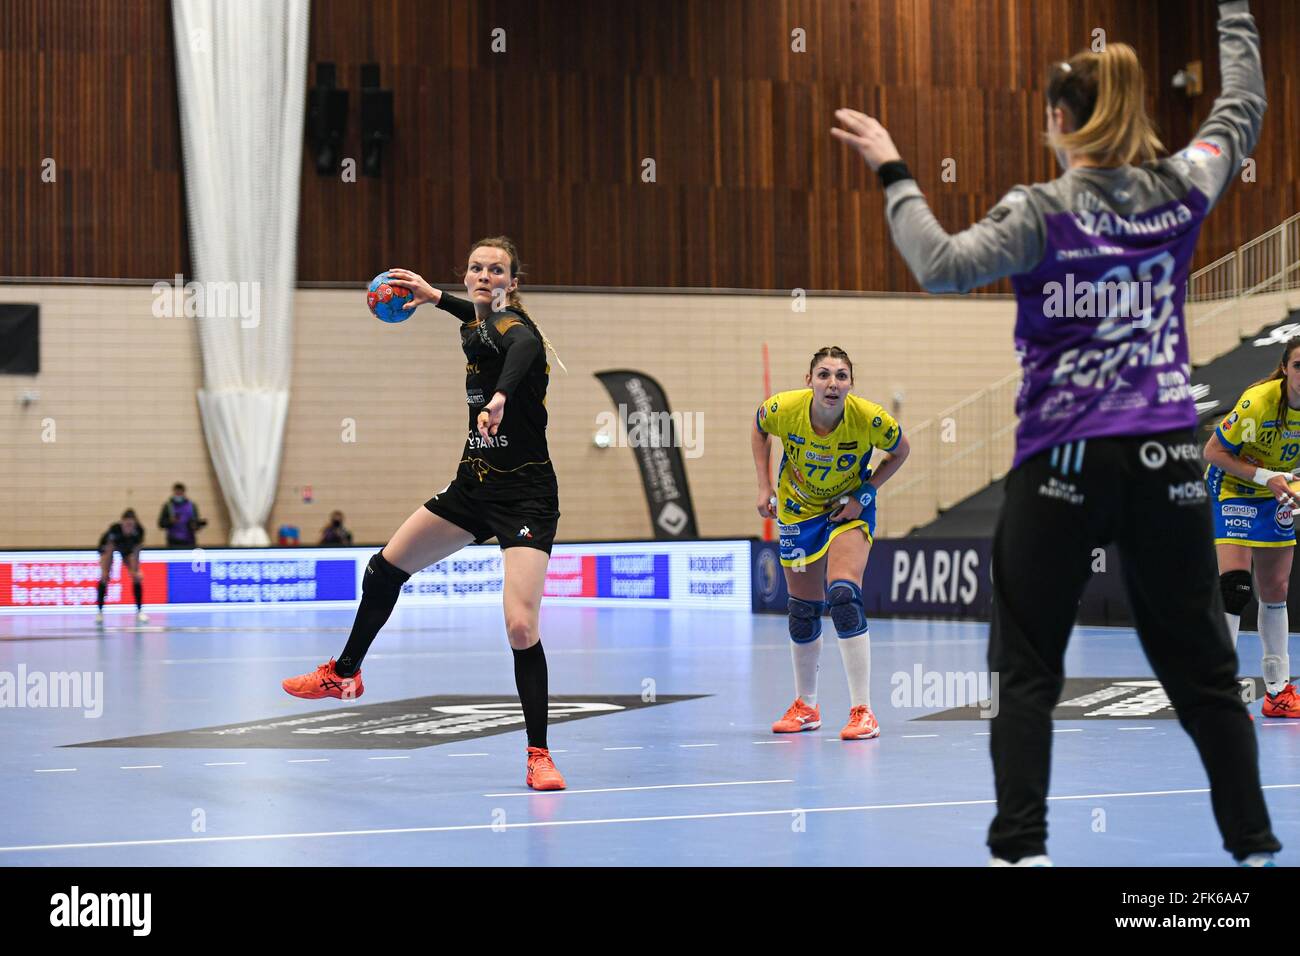 Paris, France. 28th April, 2021. Nadia Offendal during the Women's French championship, Ligue Butagaz Energie, play-offs Day 5 handball match between Paris 92 and Metz HB on April 28, 2021 at Palais des Sports Robert Charpentier in Issy-les-Moulineaux, France - Credit: Victor Joly/Alamy Live News Stock Photo